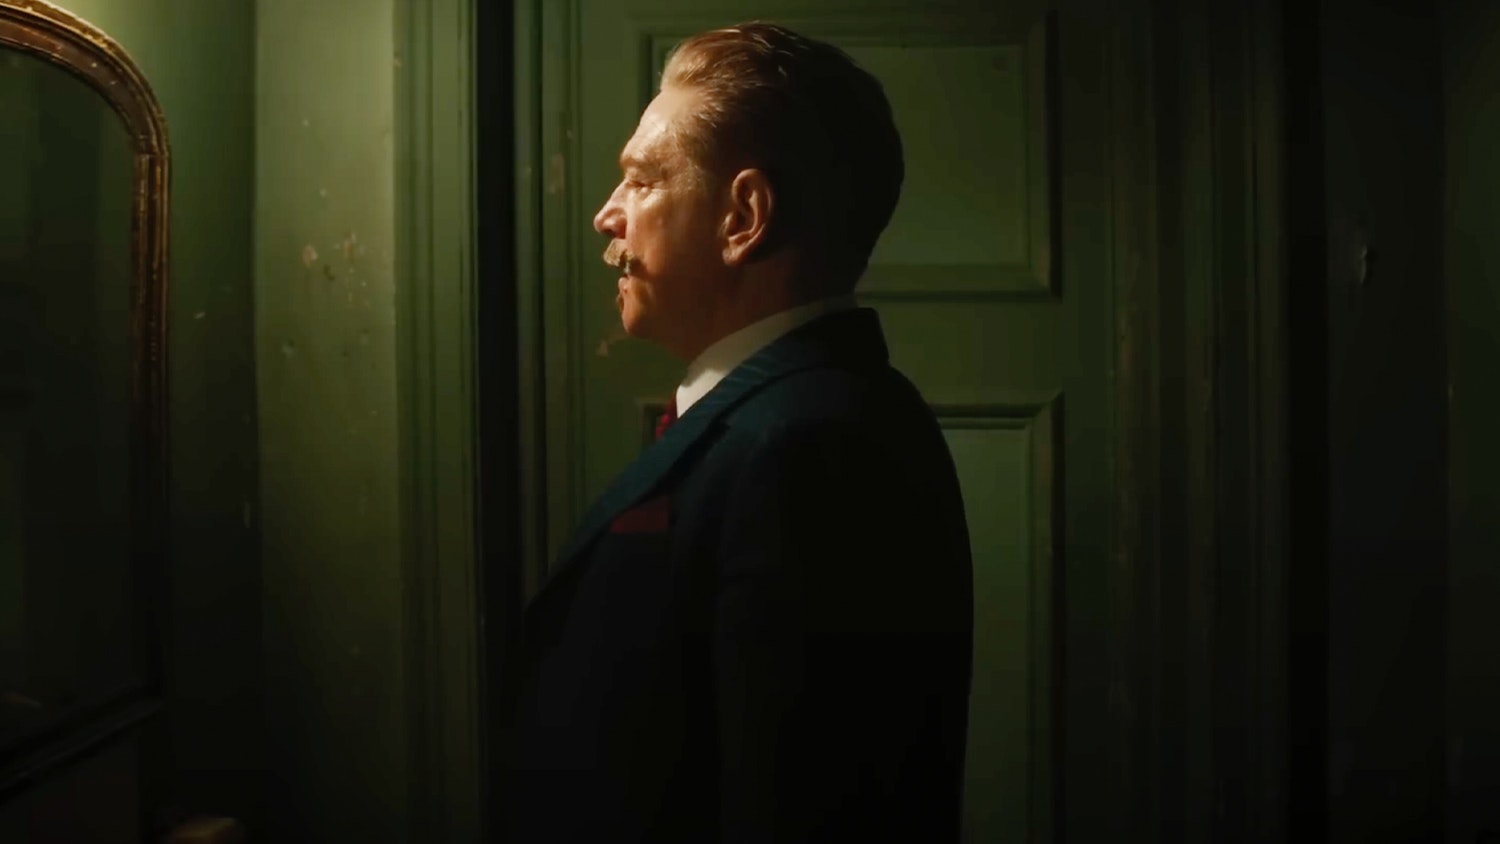 Film Review: Poirot is taken out of retirement in A Haunting in Venice